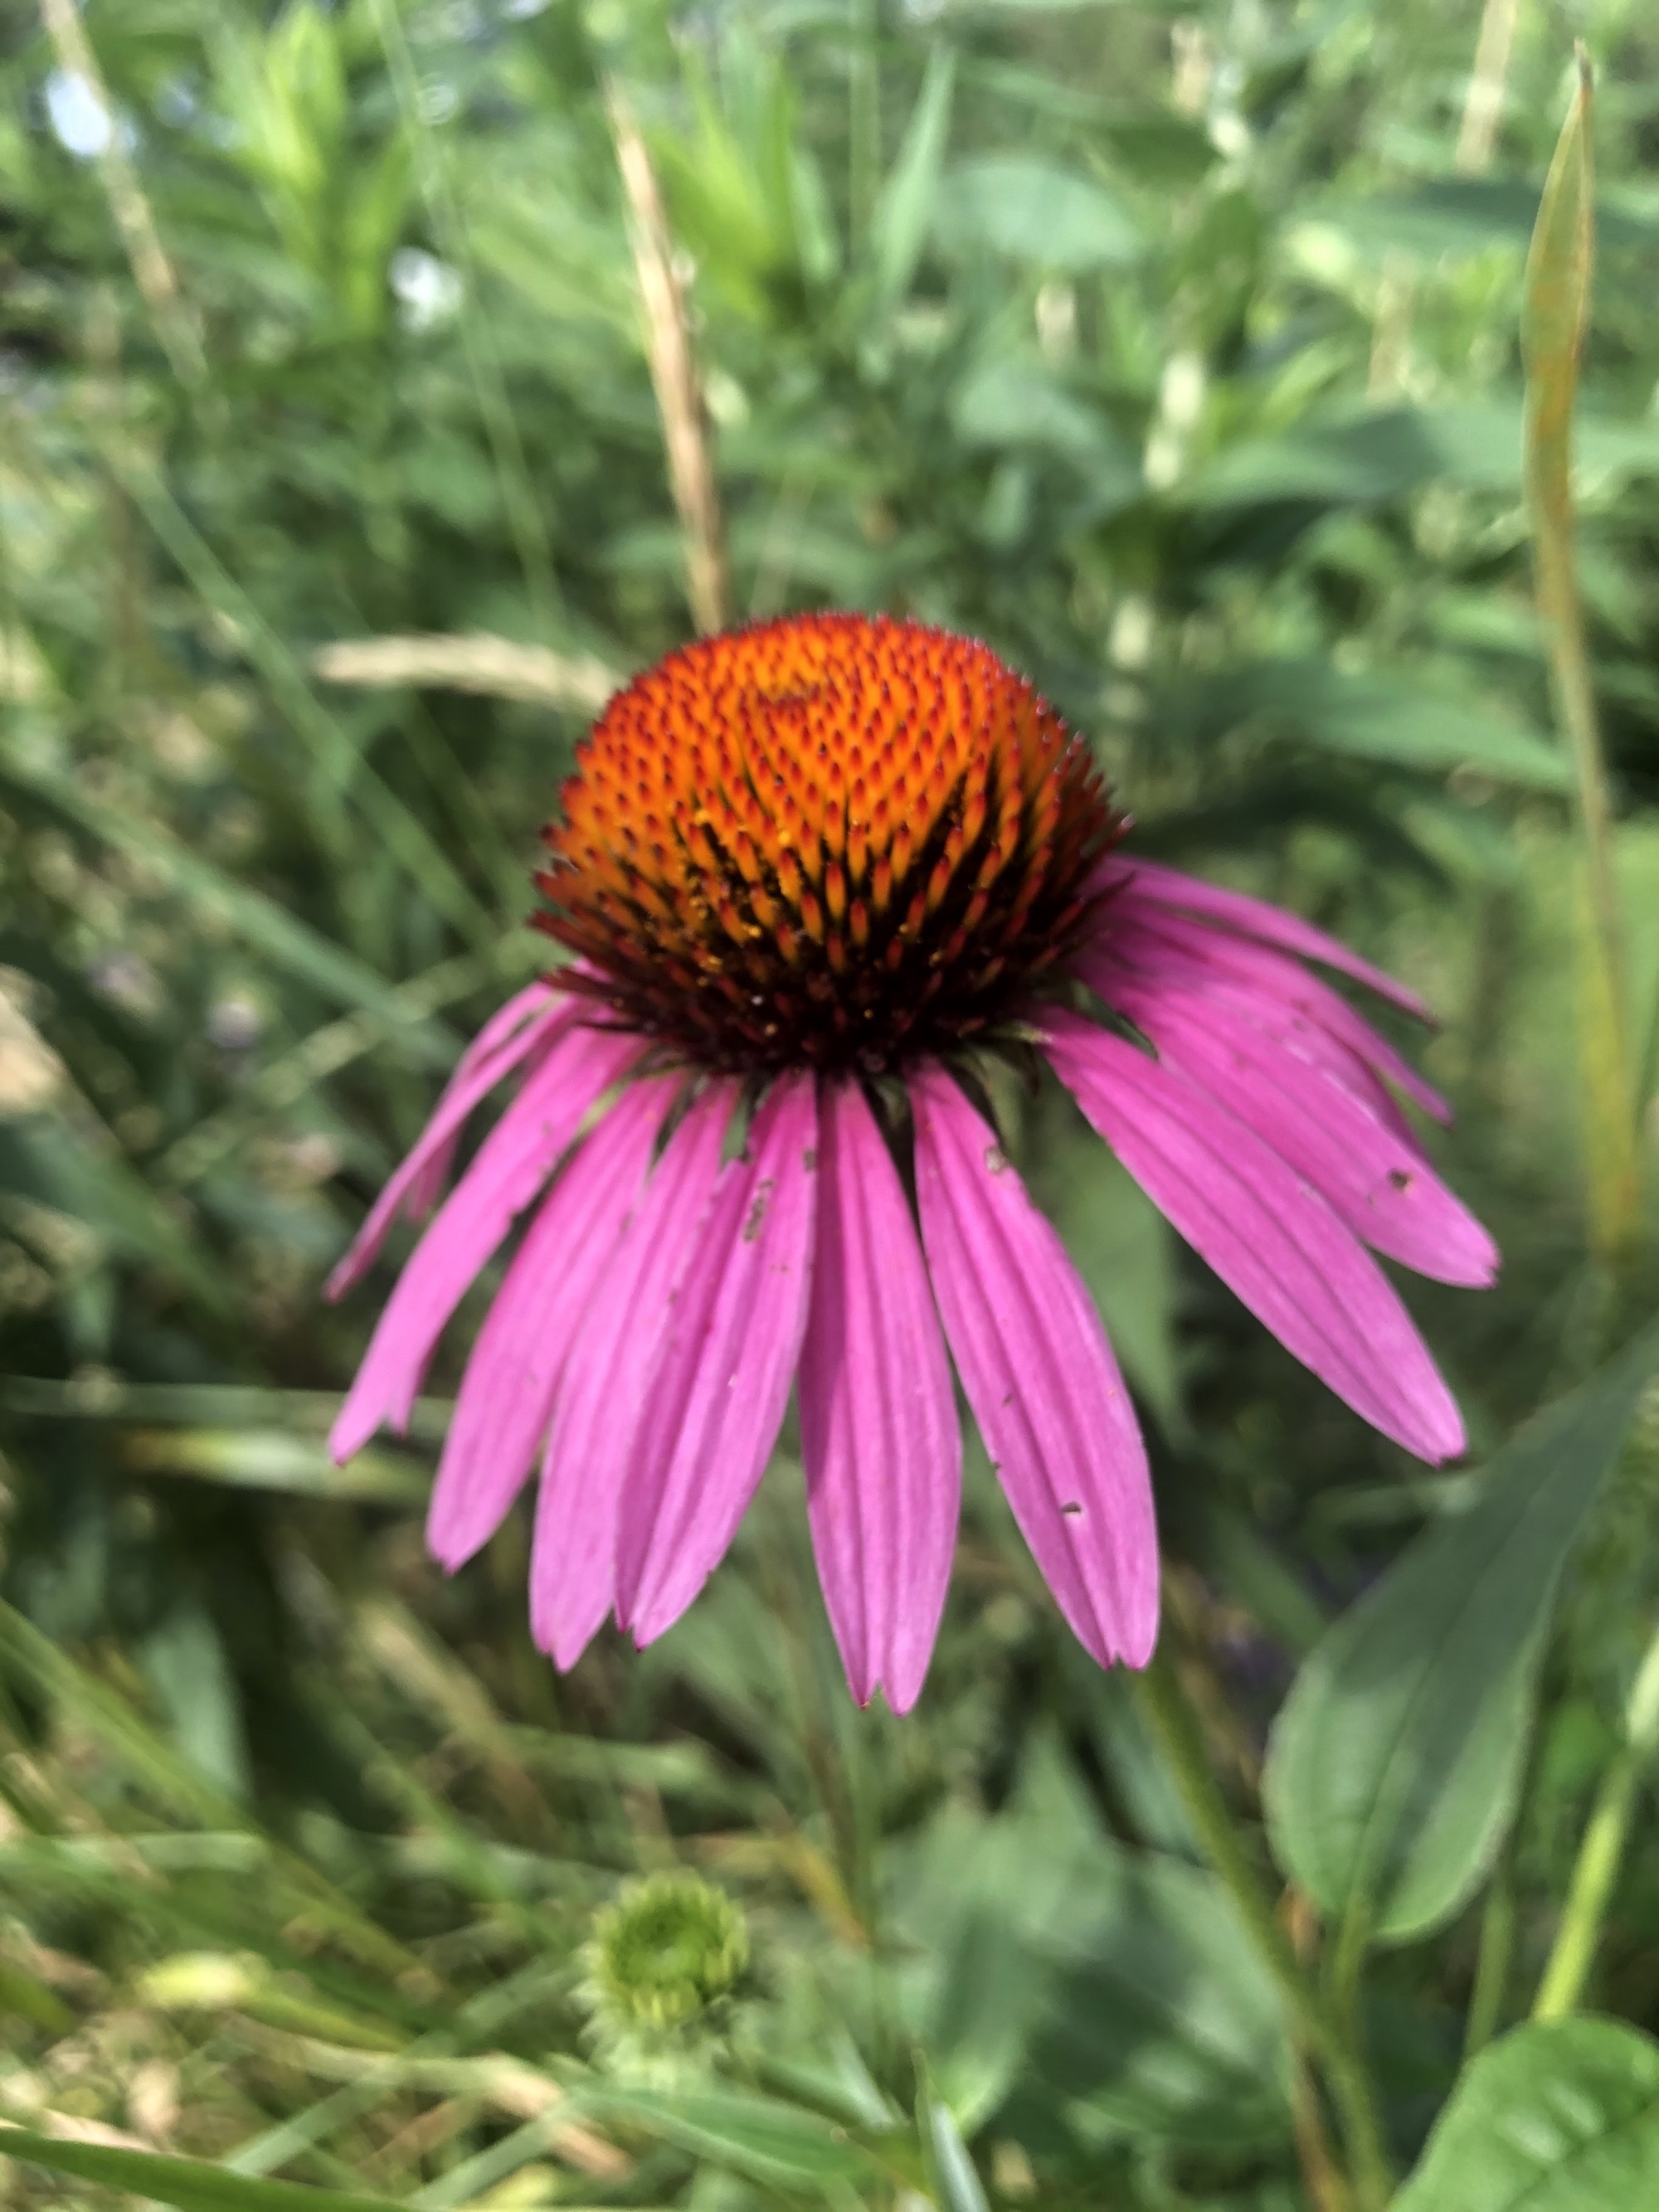 Purple coneflower in the woods in Nakoma Park in Madison, Wisconsin on July 21, 2020.